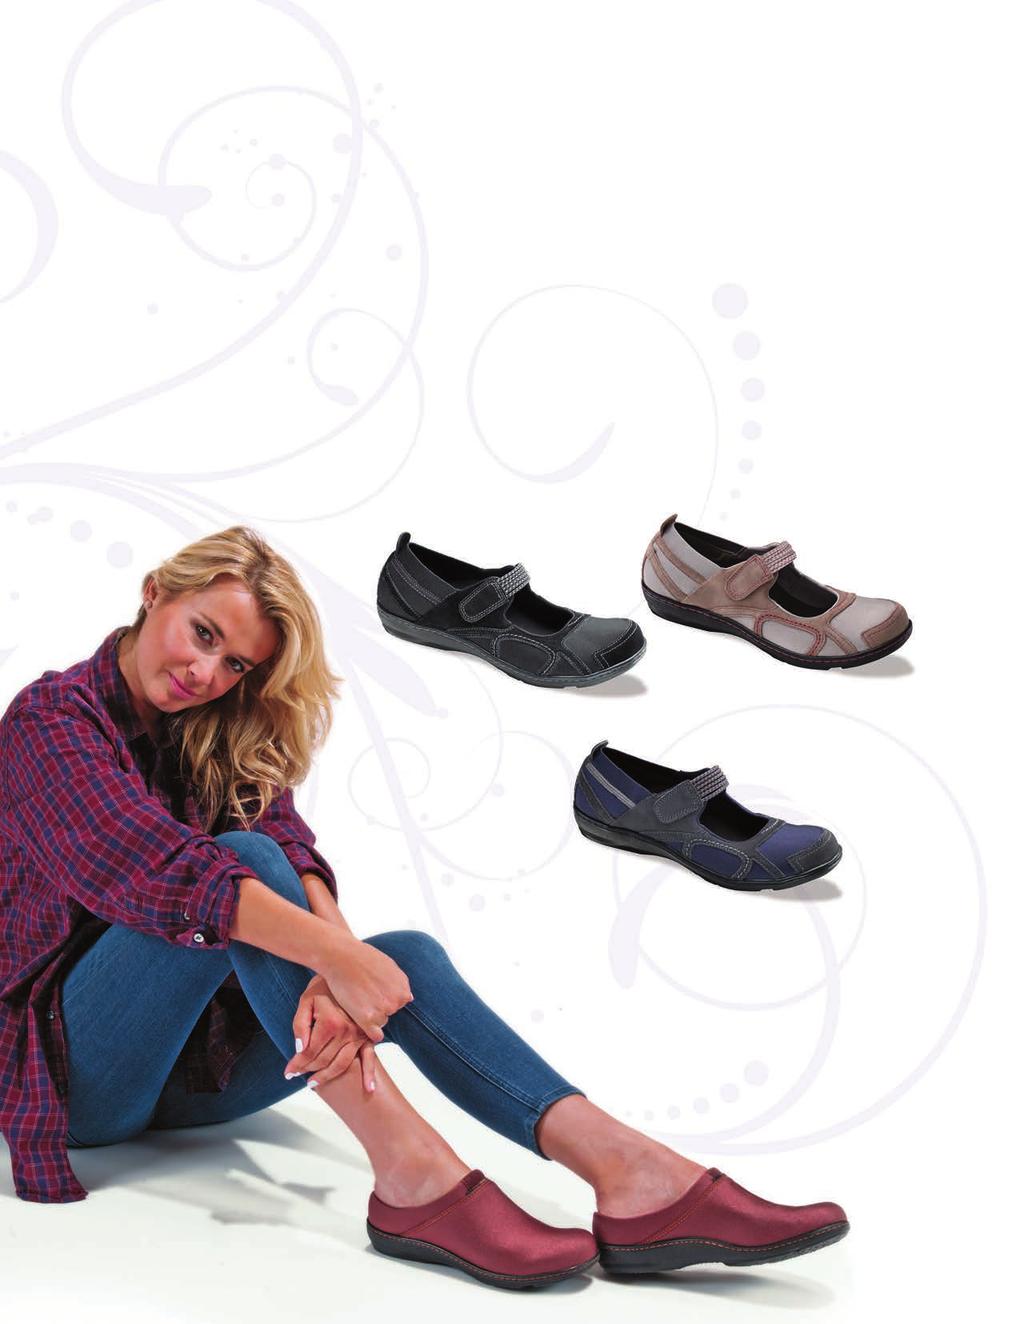 n Lynco orthotic footbeds for support, balance & alignment n Memory foam cushioning for customization & comfort n Aegis anti-microbial technology embedded in footbed & linings to help protect against